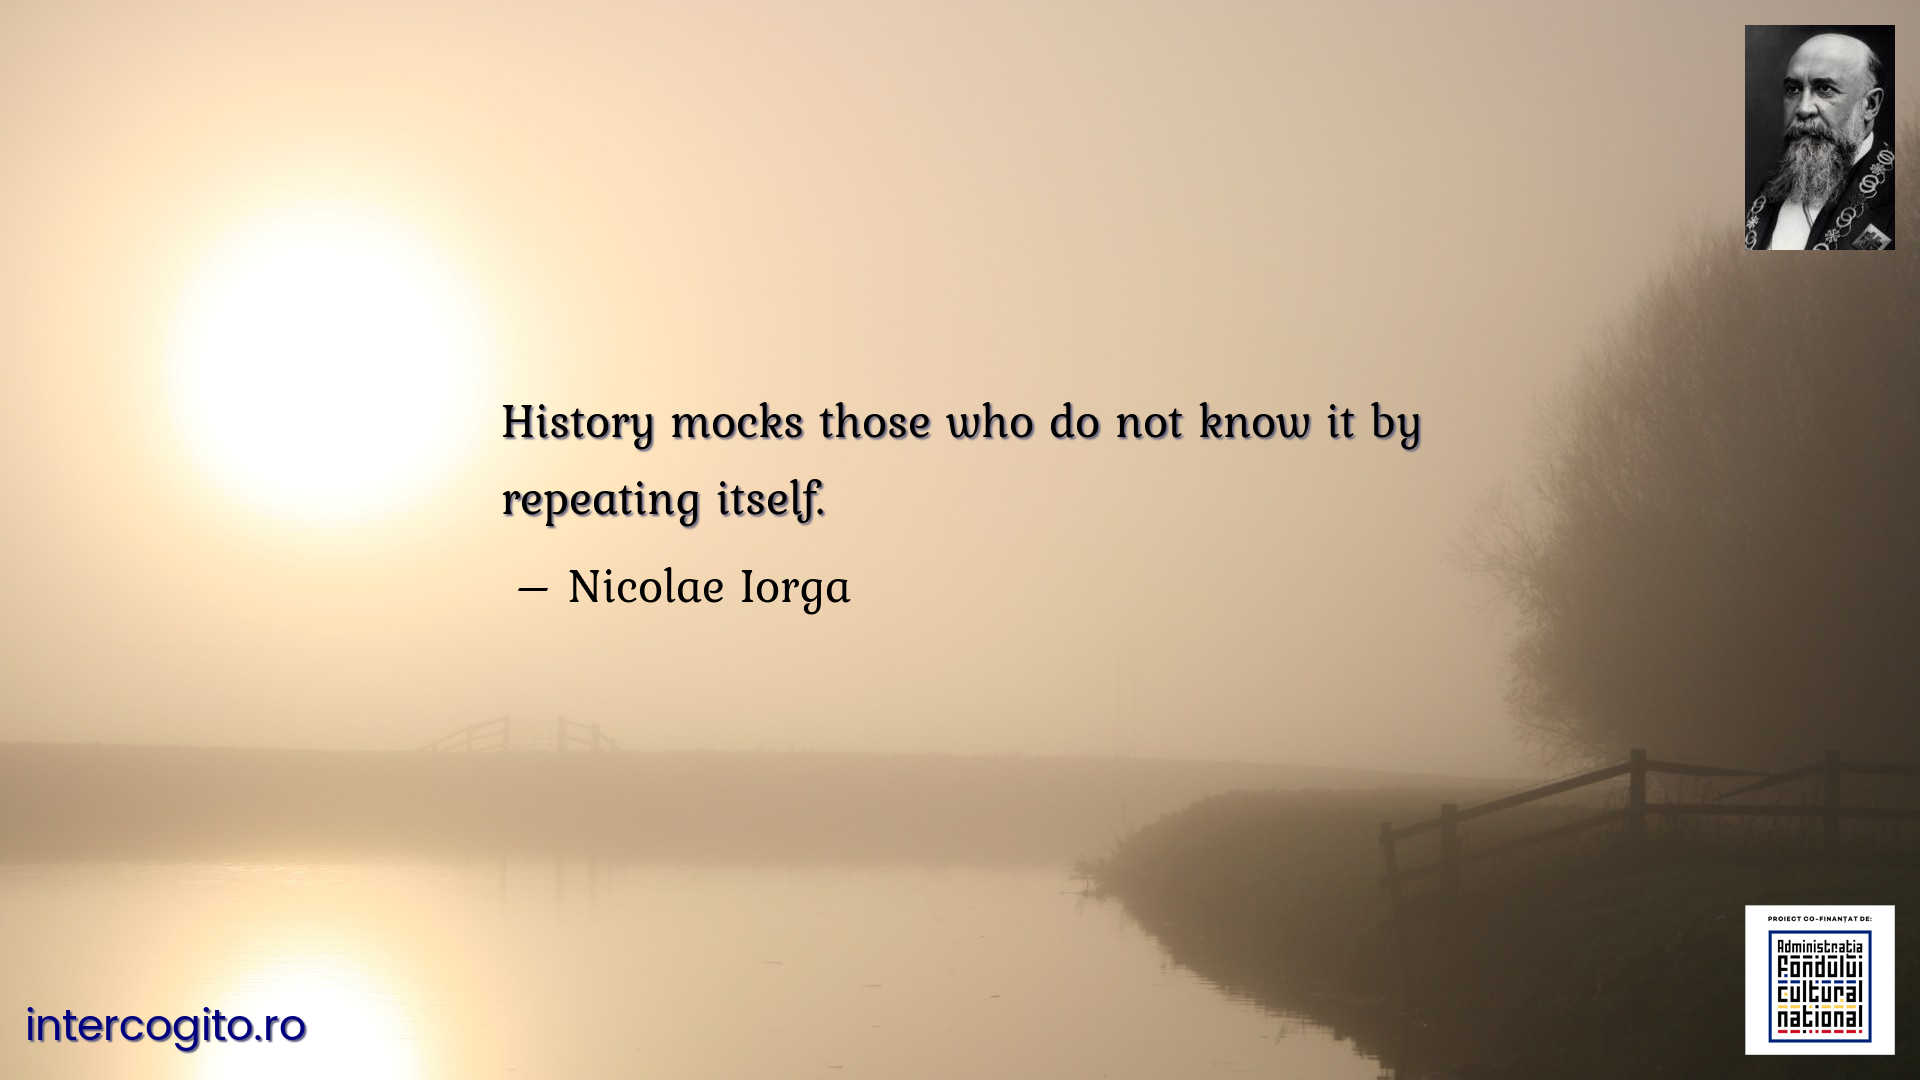 History mocks those who do not know it by repeating itself.